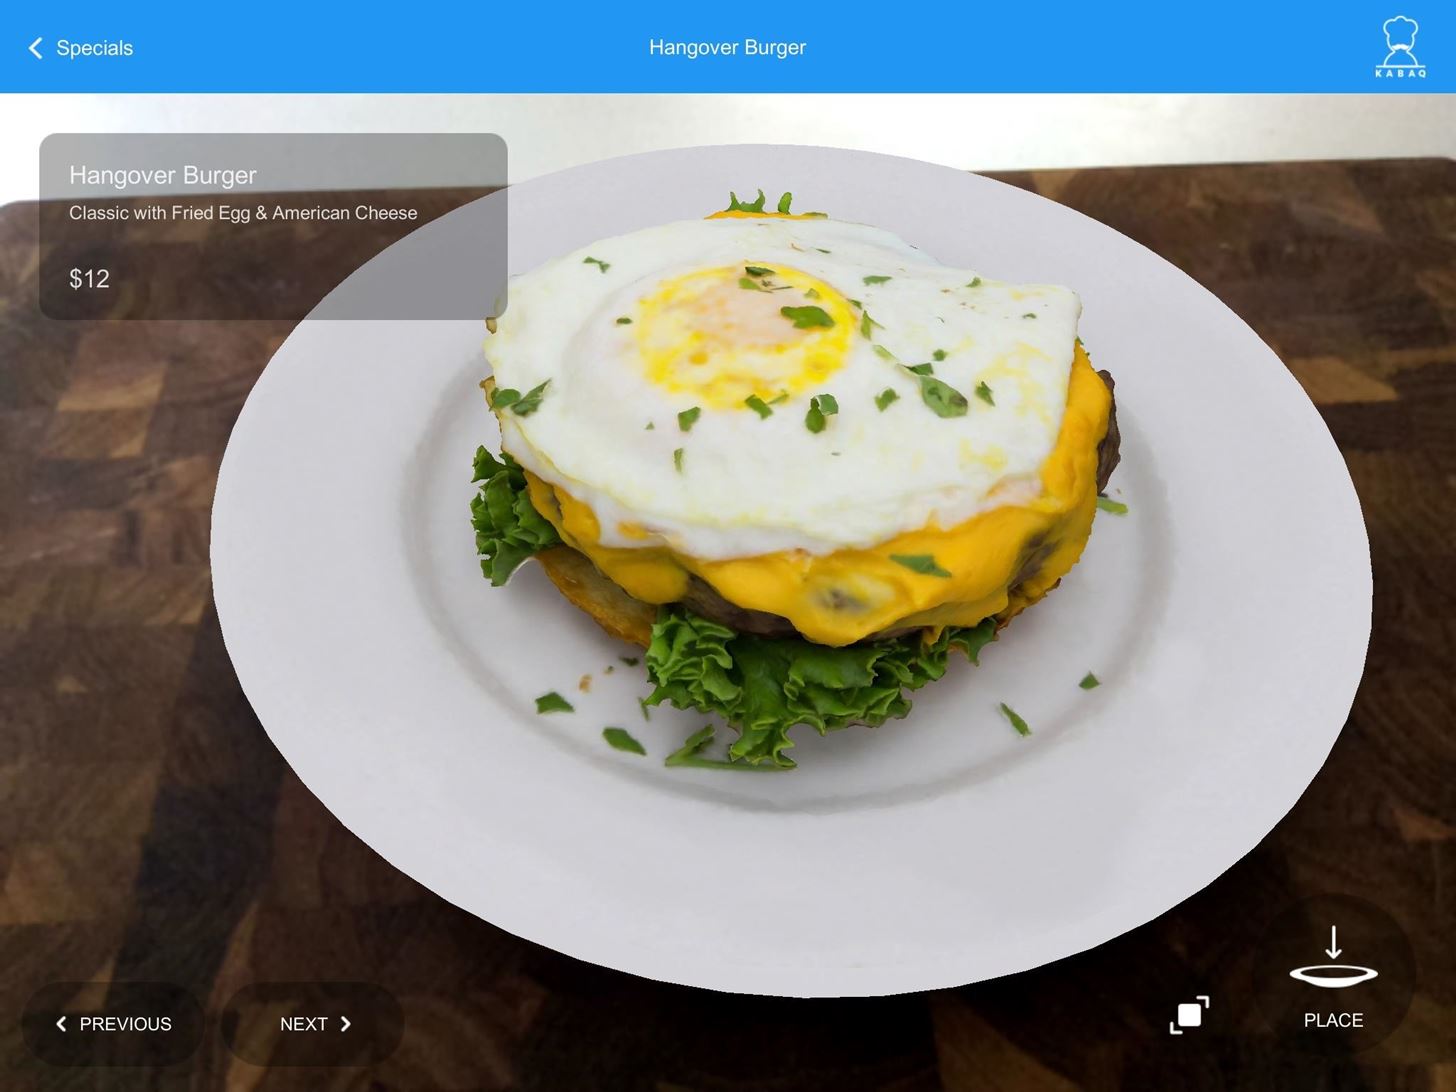 KabaQ Transitions the Traditional Restaurant Menu to Augmented Reality